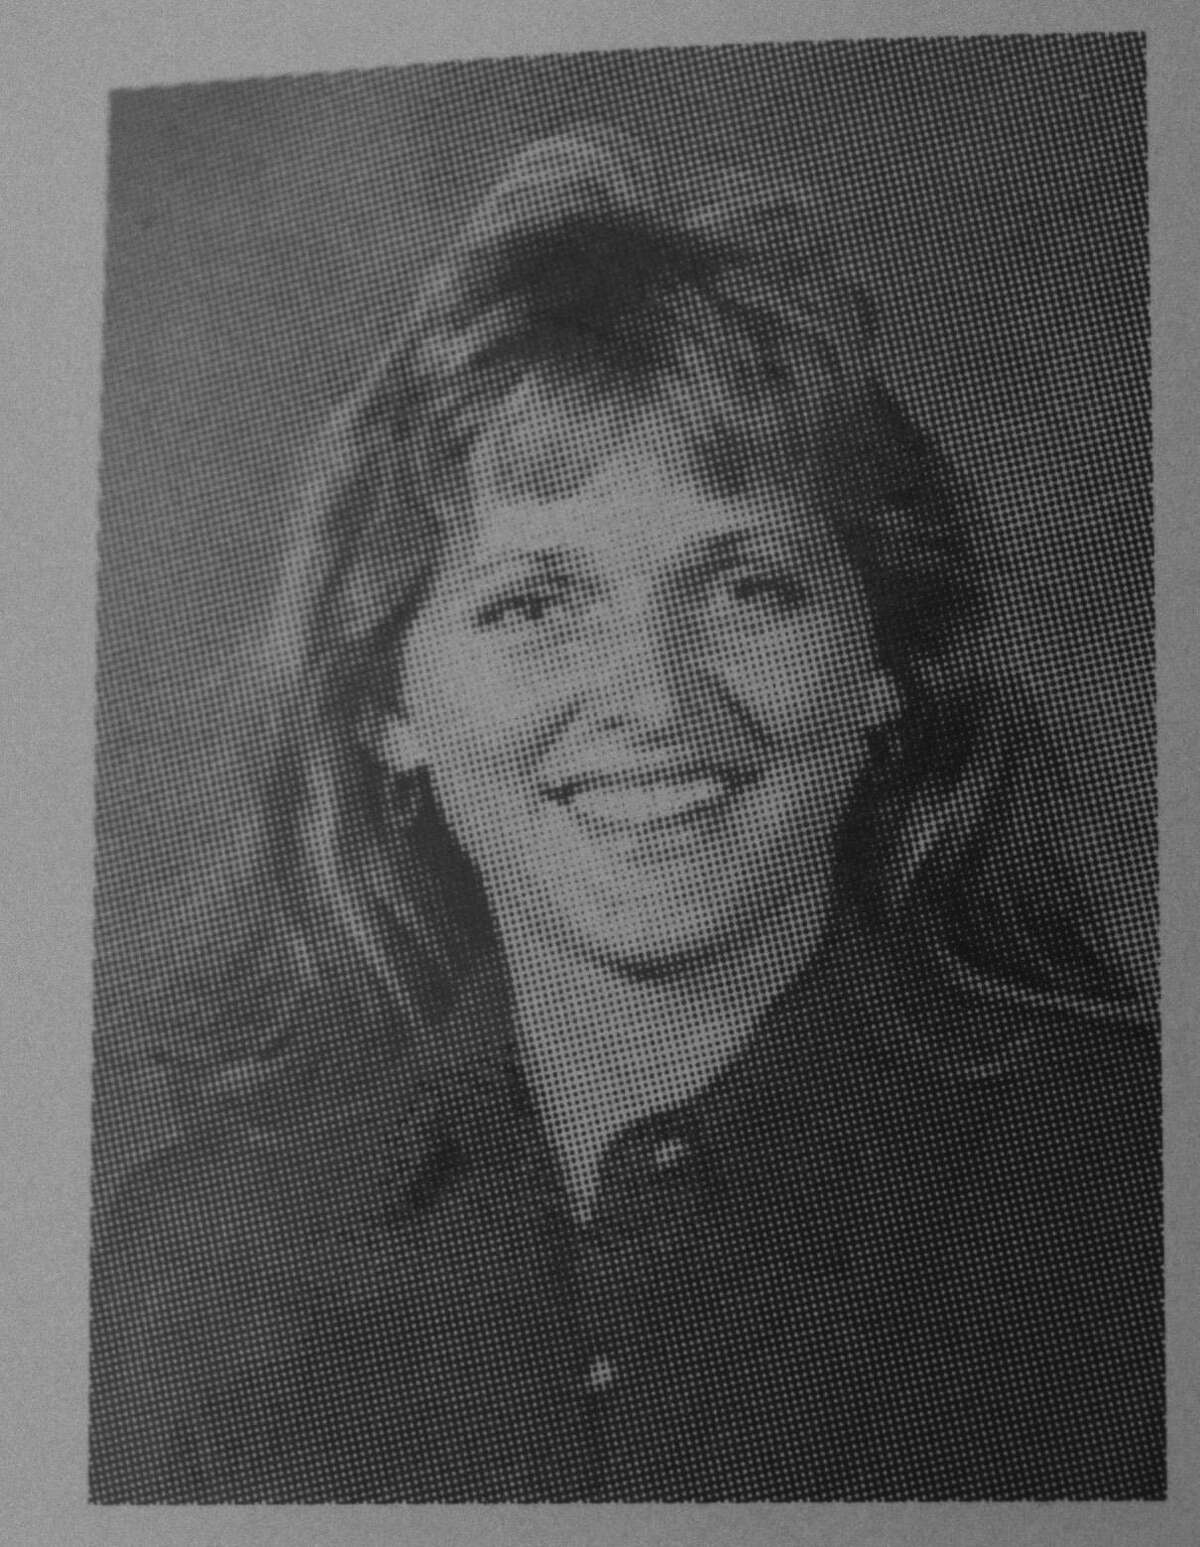 Copy yearbook photo of Belinda Temple, 30, teacher at Katy High School who was found murdered in her home Monday. Temple, pregnant was found shot to death. HOUCHRON CAPTION (01/13/1999): Temple. HOUCHRON CAPTION (01/16/1999): B. Temple